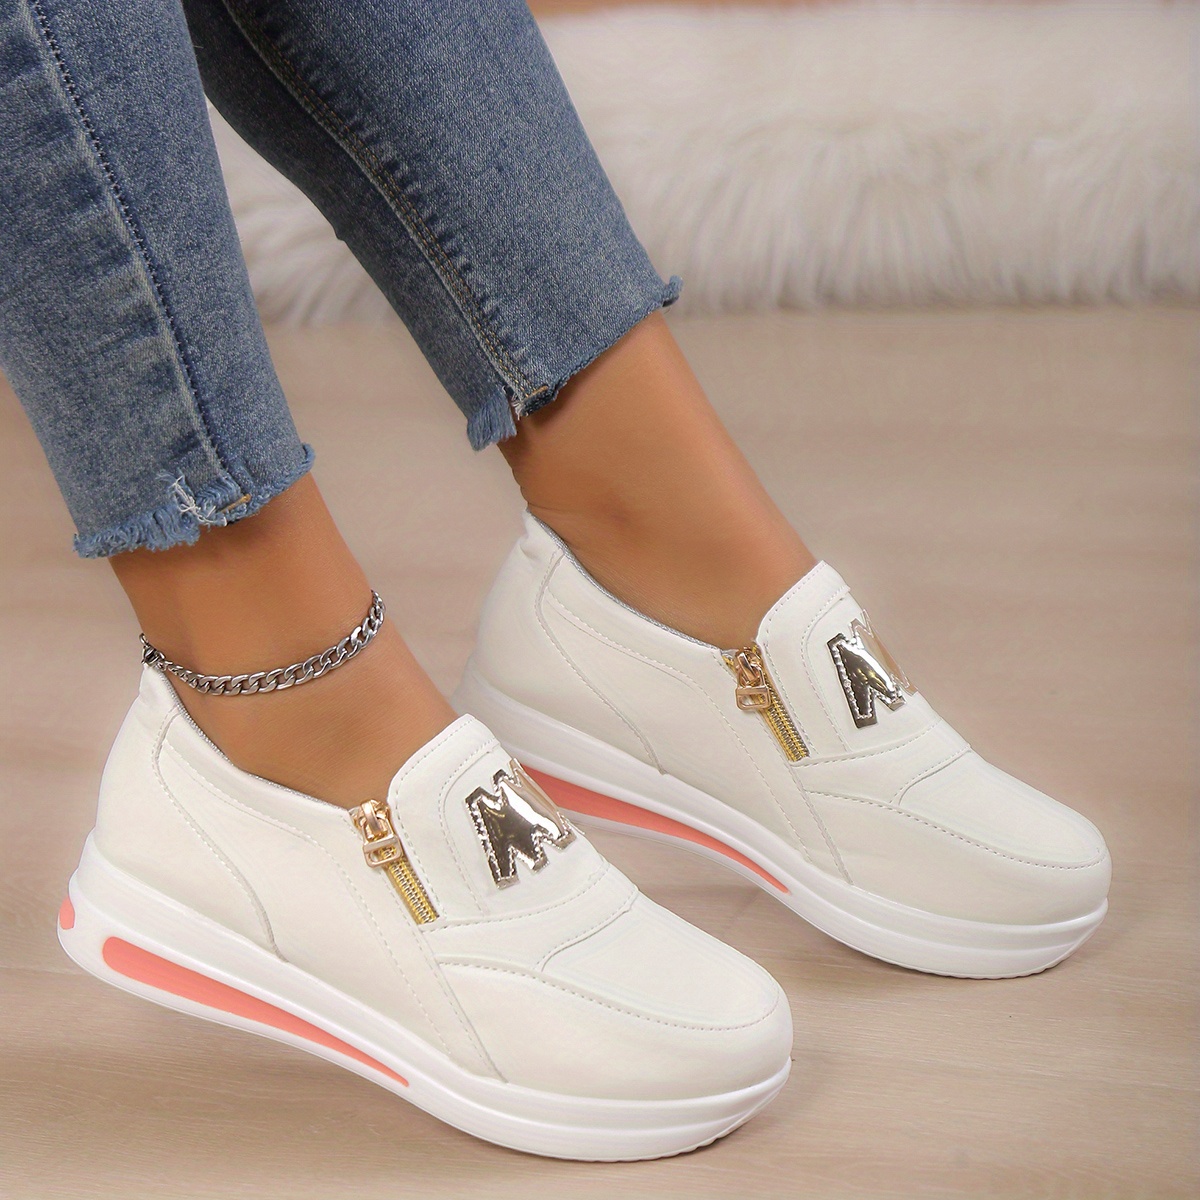 🔥Last Day Promotion 50% OFF - Women's casual platform slip-on orthopedic sneakers